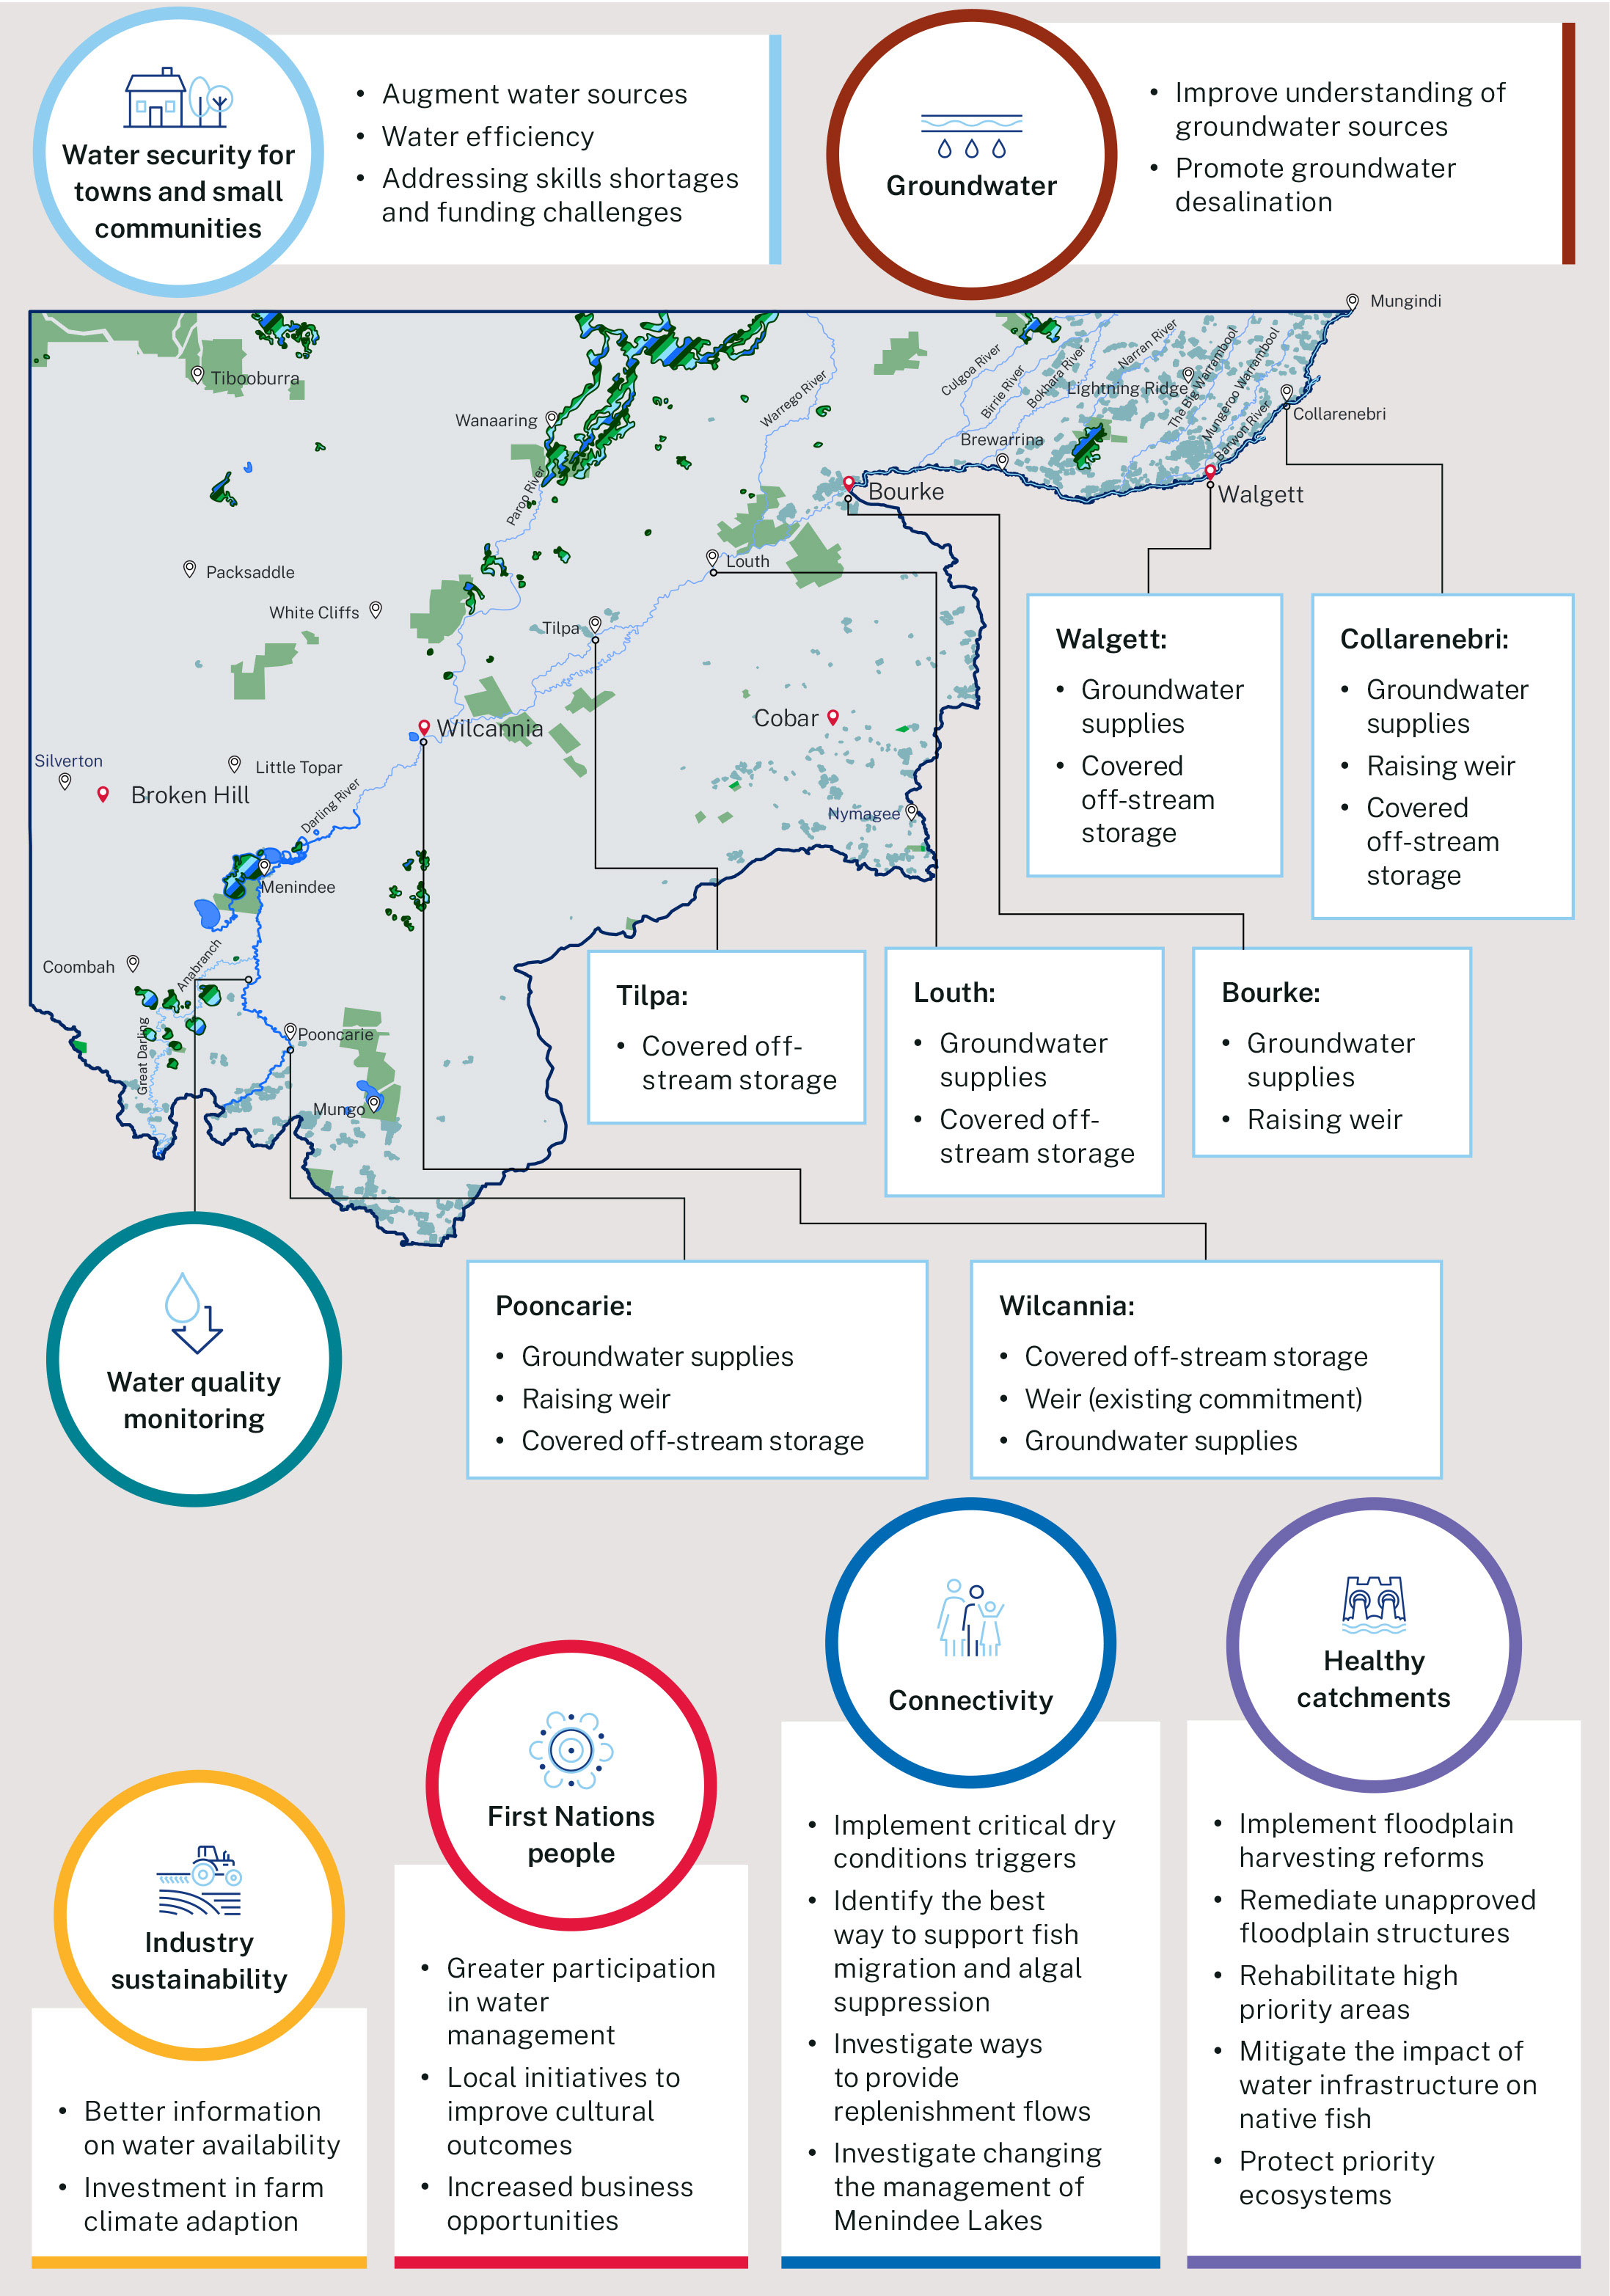 Summary of actions for the Western Regional Water Strategy